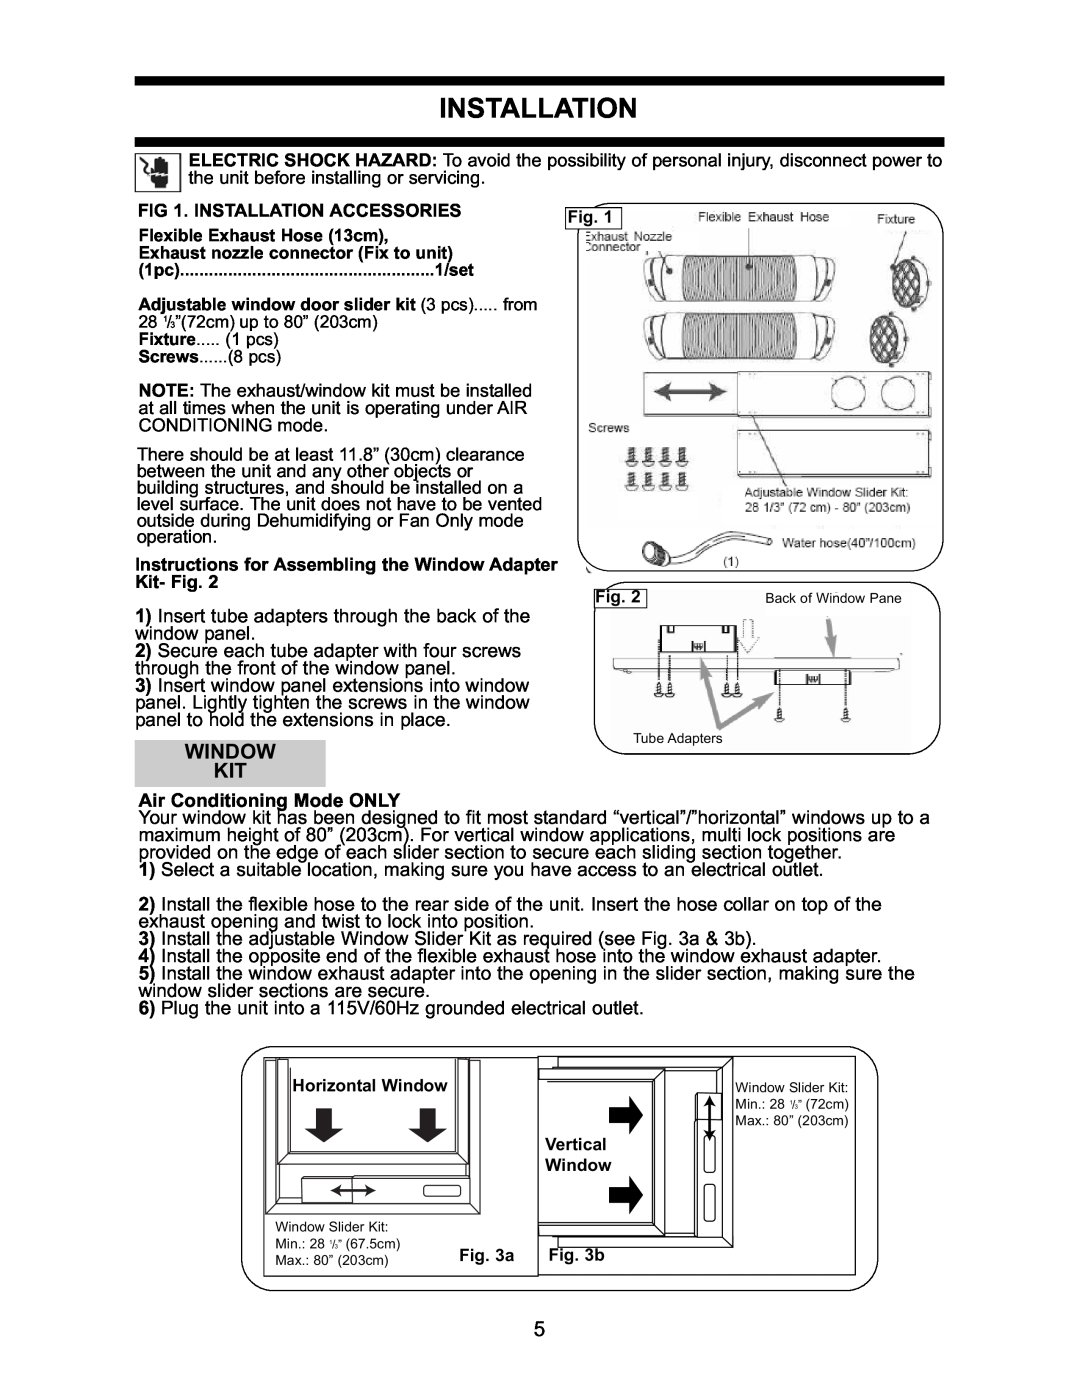 Danby DPAC7099 operating instructions Window Kit, Installation Accessories, Air Conditioning Mode ONLY 